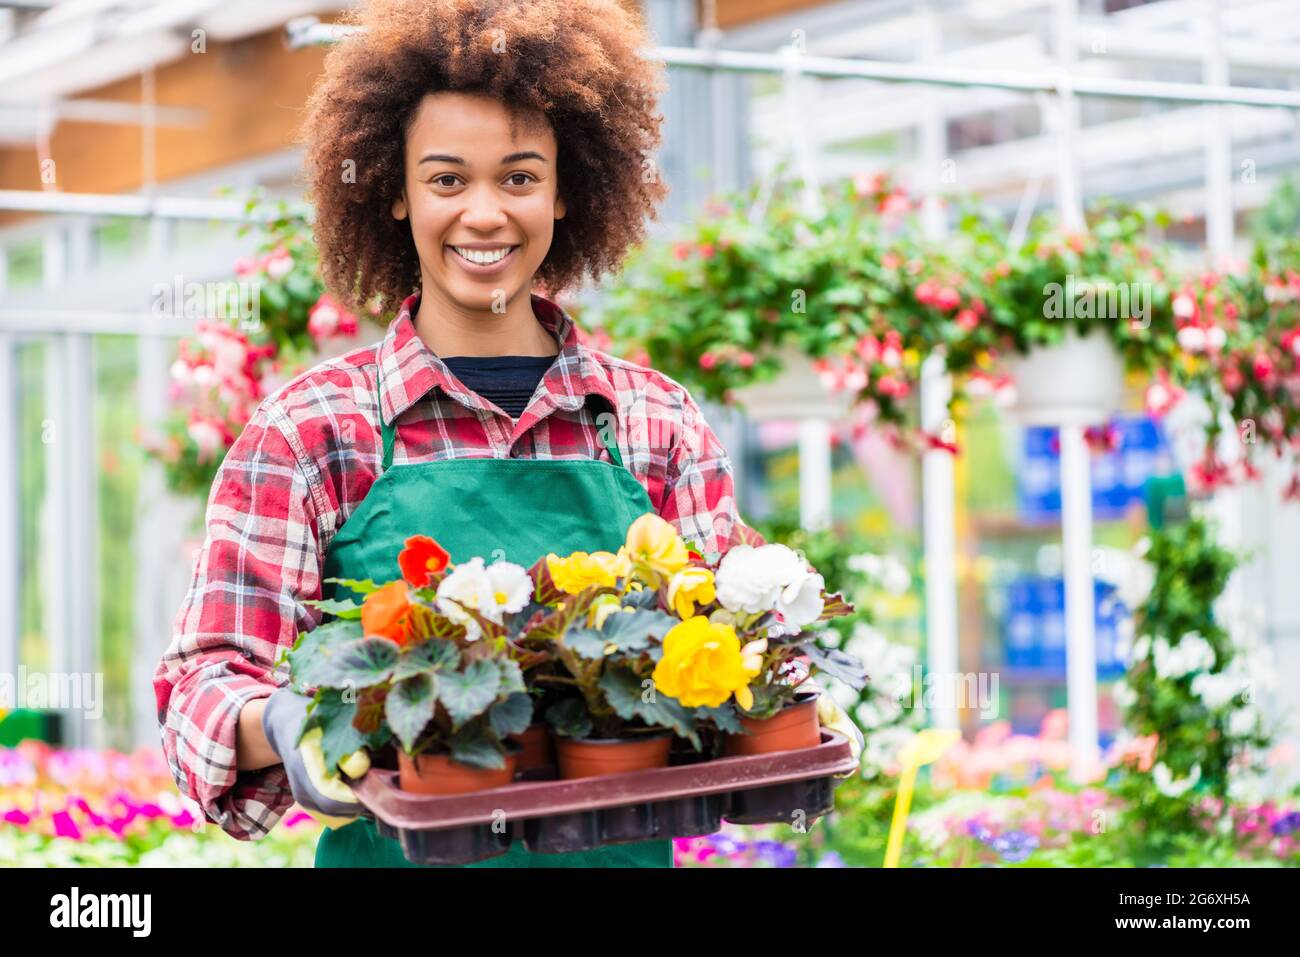 Side view of a dedicated florist holding a tray with decorative potted flowers while working in a modern flower shop with various houseplants for sale Stock Photo